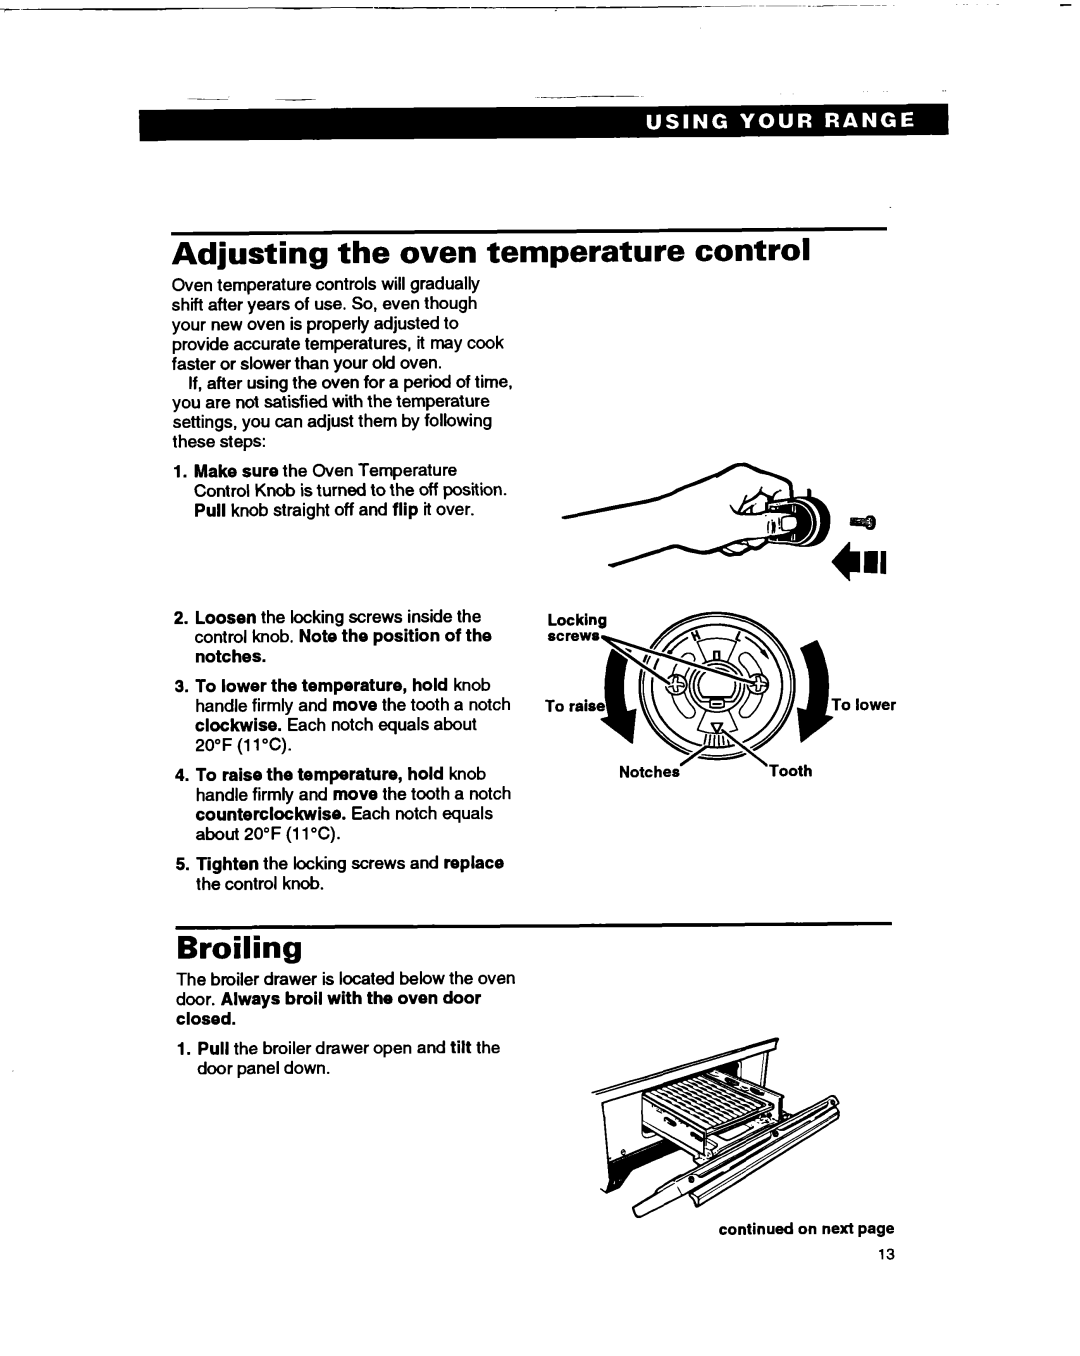 Whirlpool TGR51WO manual Adjusting the oven temperature control, Broiling, continued on next page 